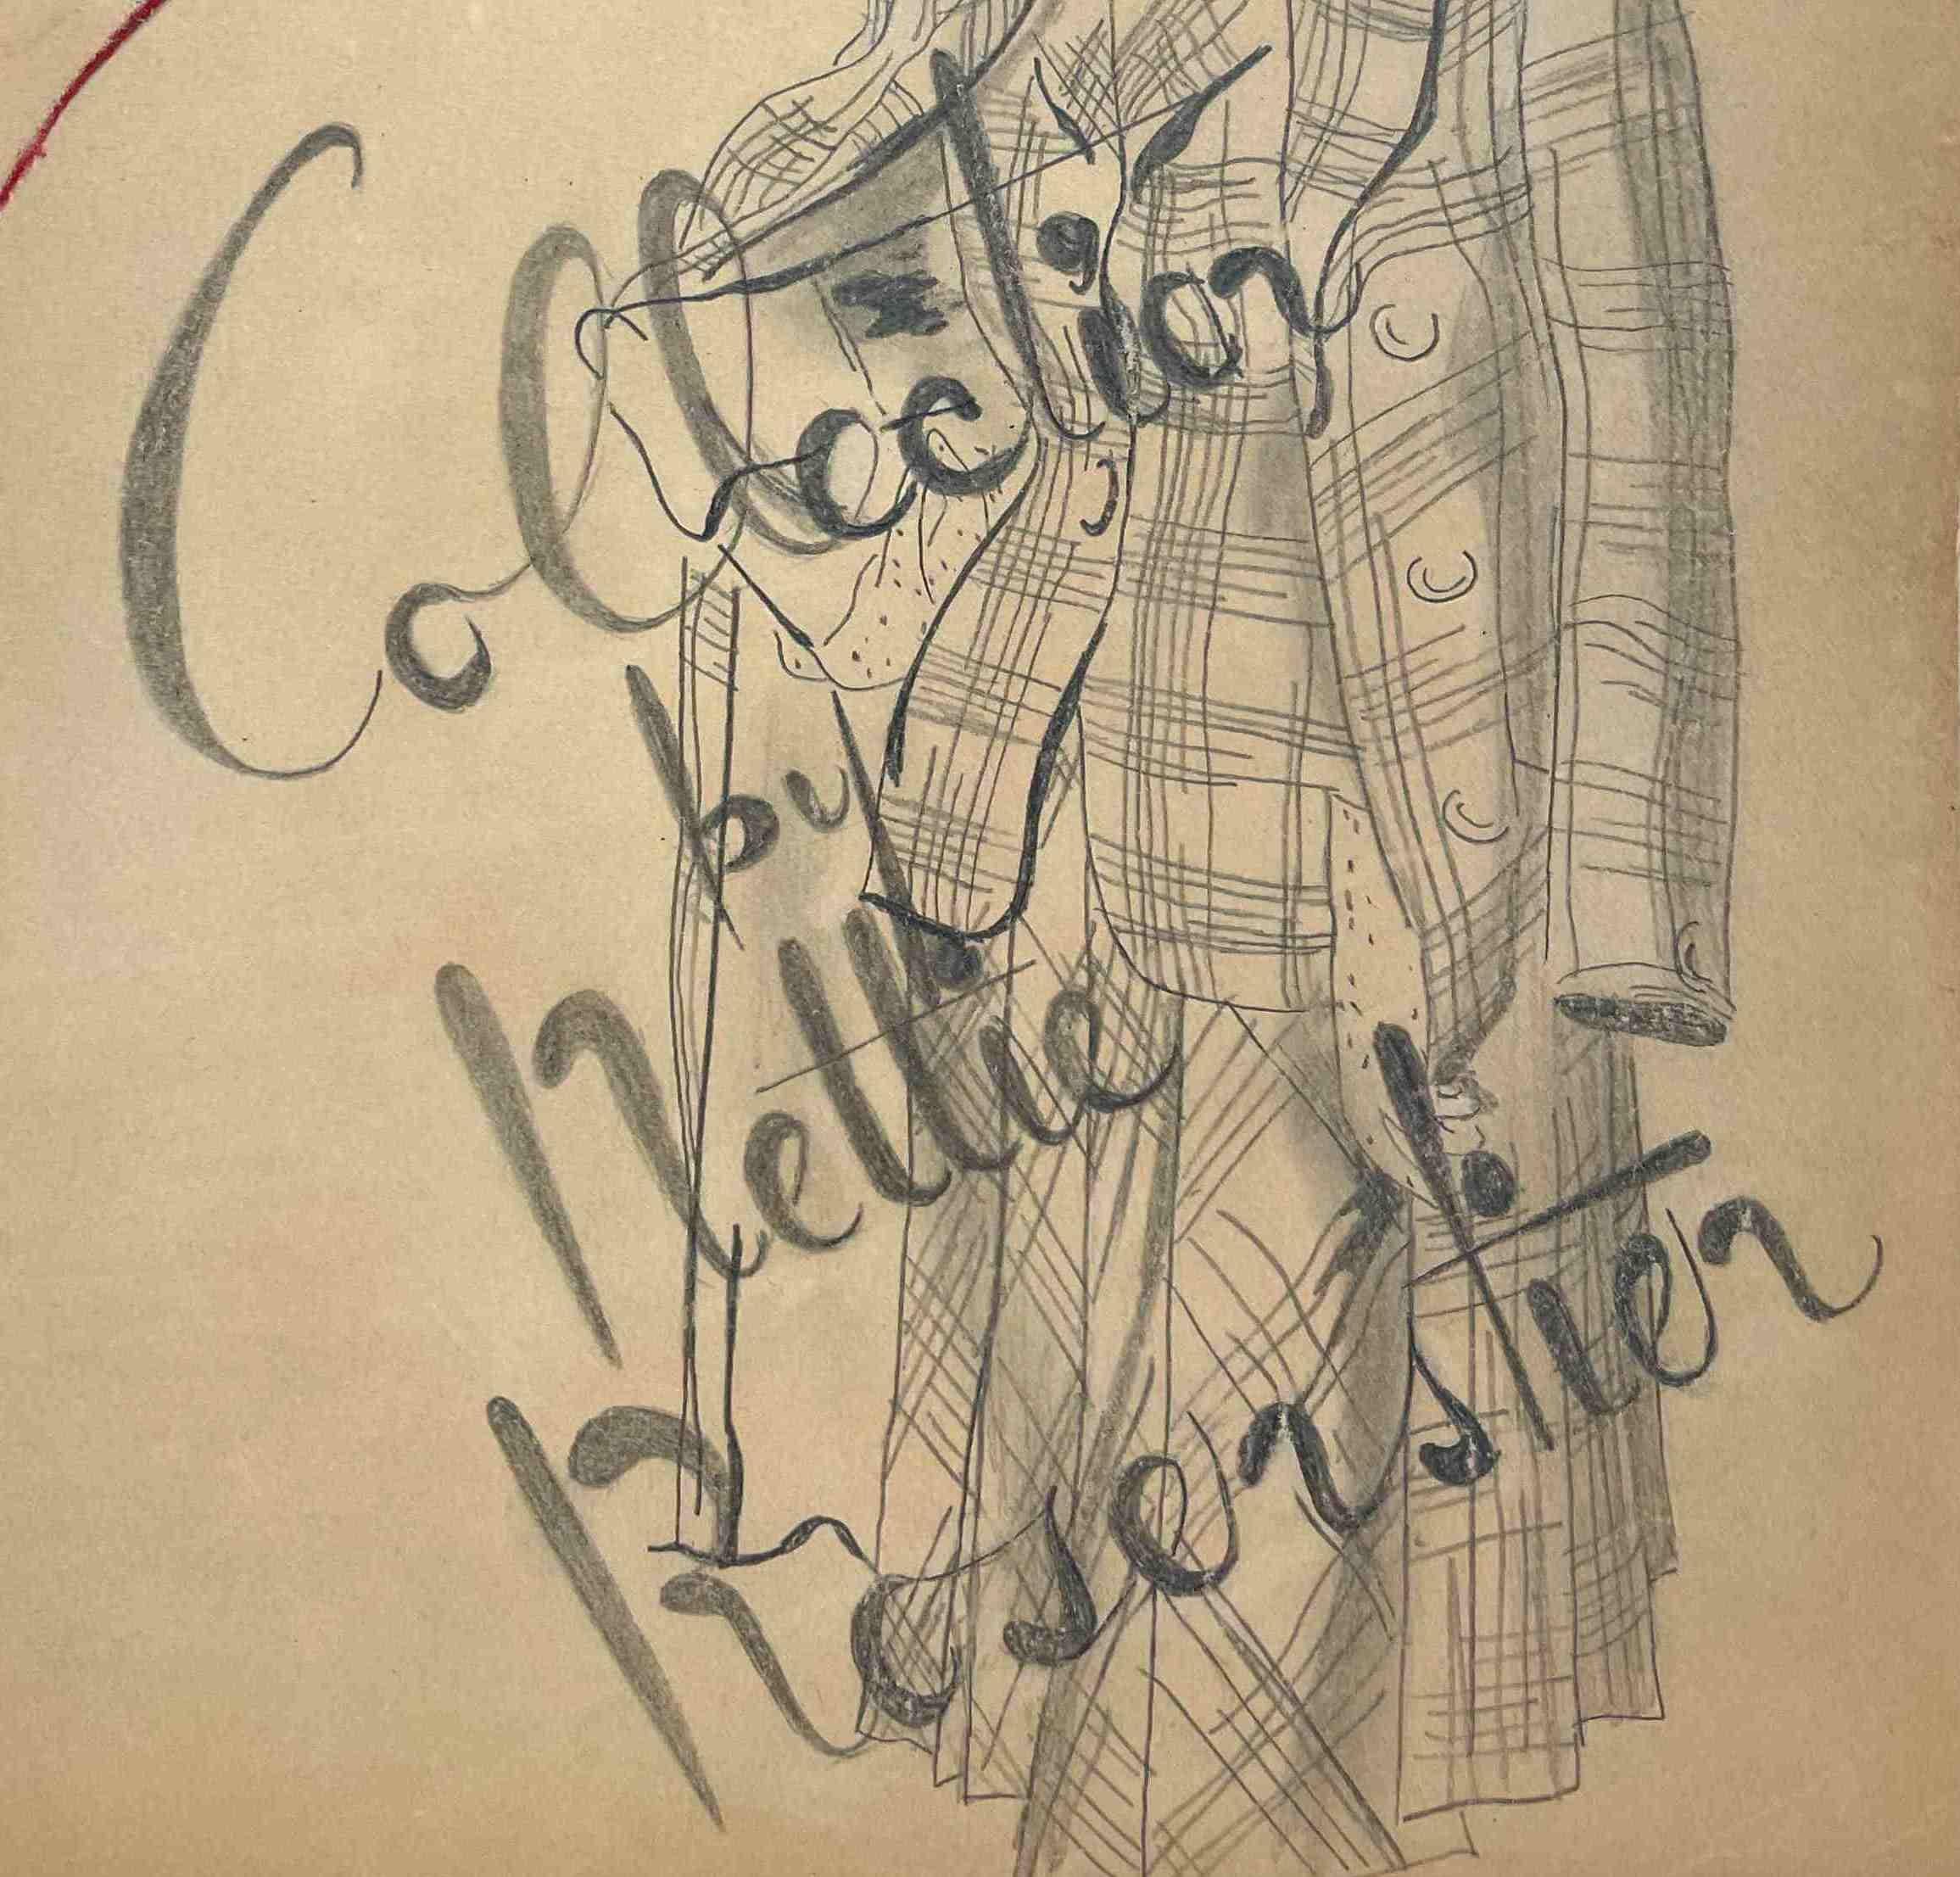 A 1940s Fashion Study for the Southern Collection by Nettie Rosenstein - American Modern Art by Unknown